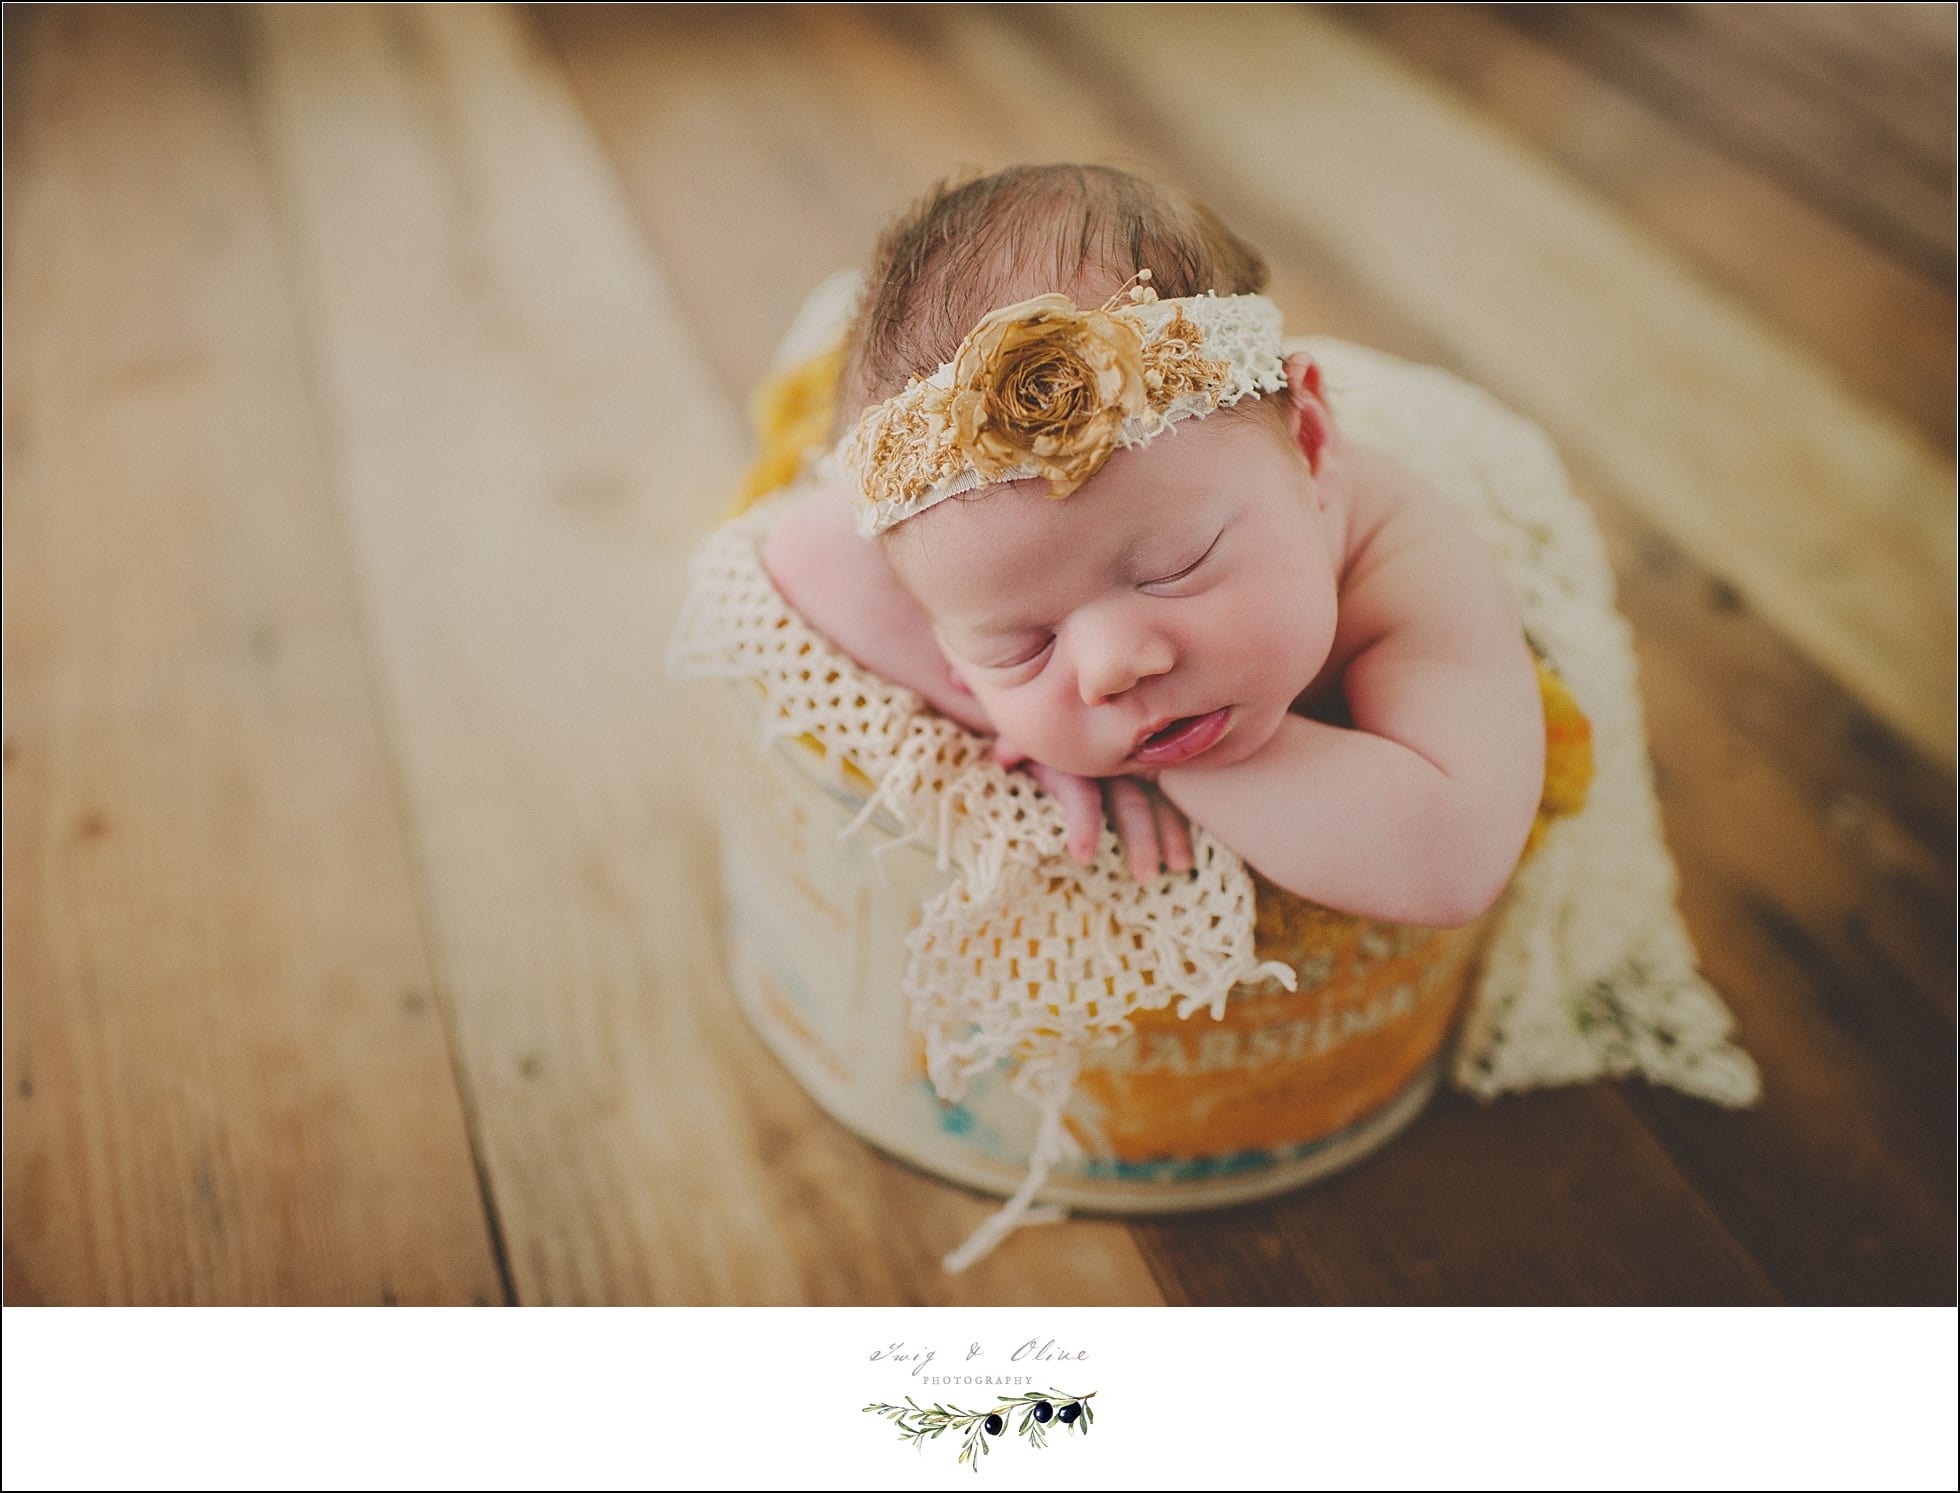 hair flowers, baskets, bonnets, babies, rustic outdoor sessions